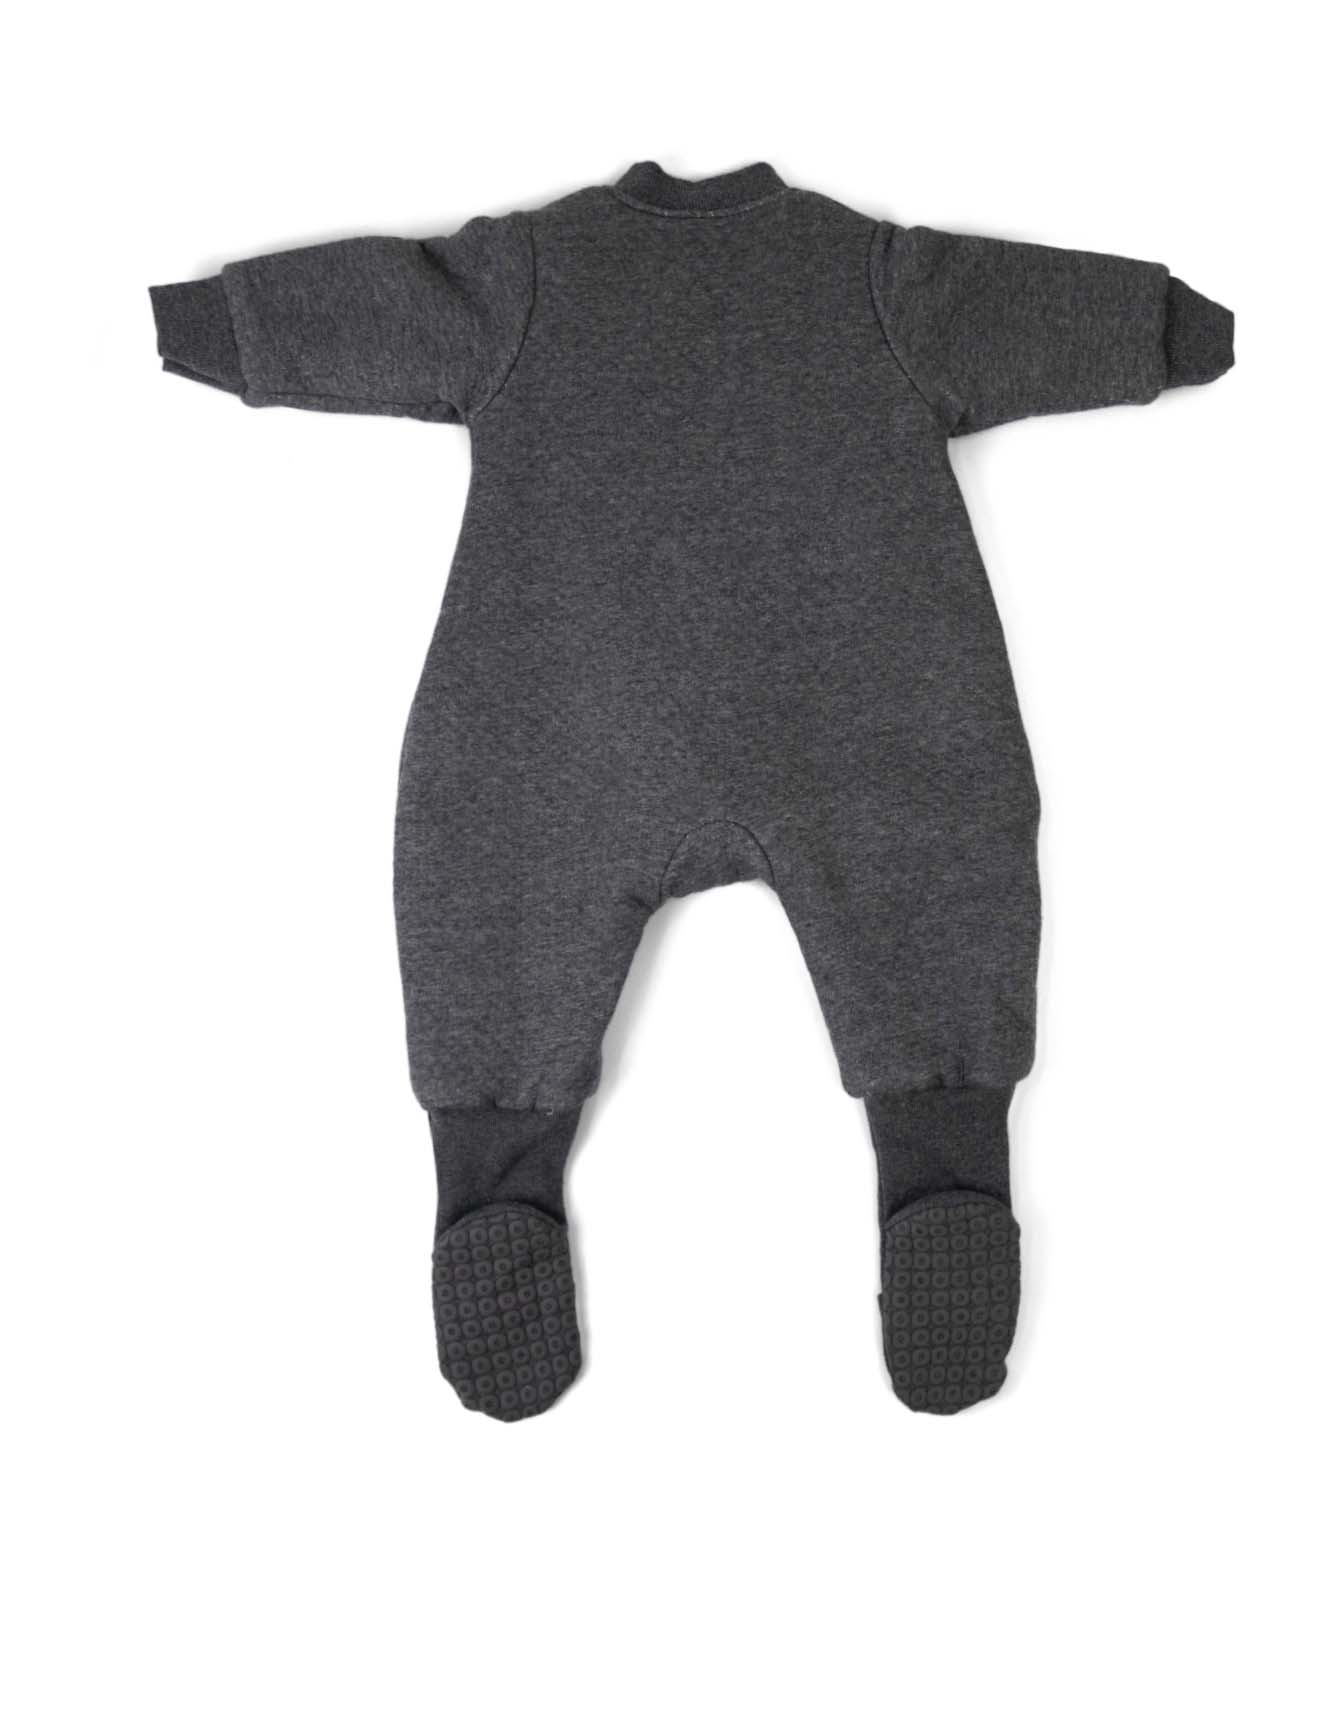 Charcoal Winter Warmies with Arms 3.0TOG (6-12 Months) | babystudio